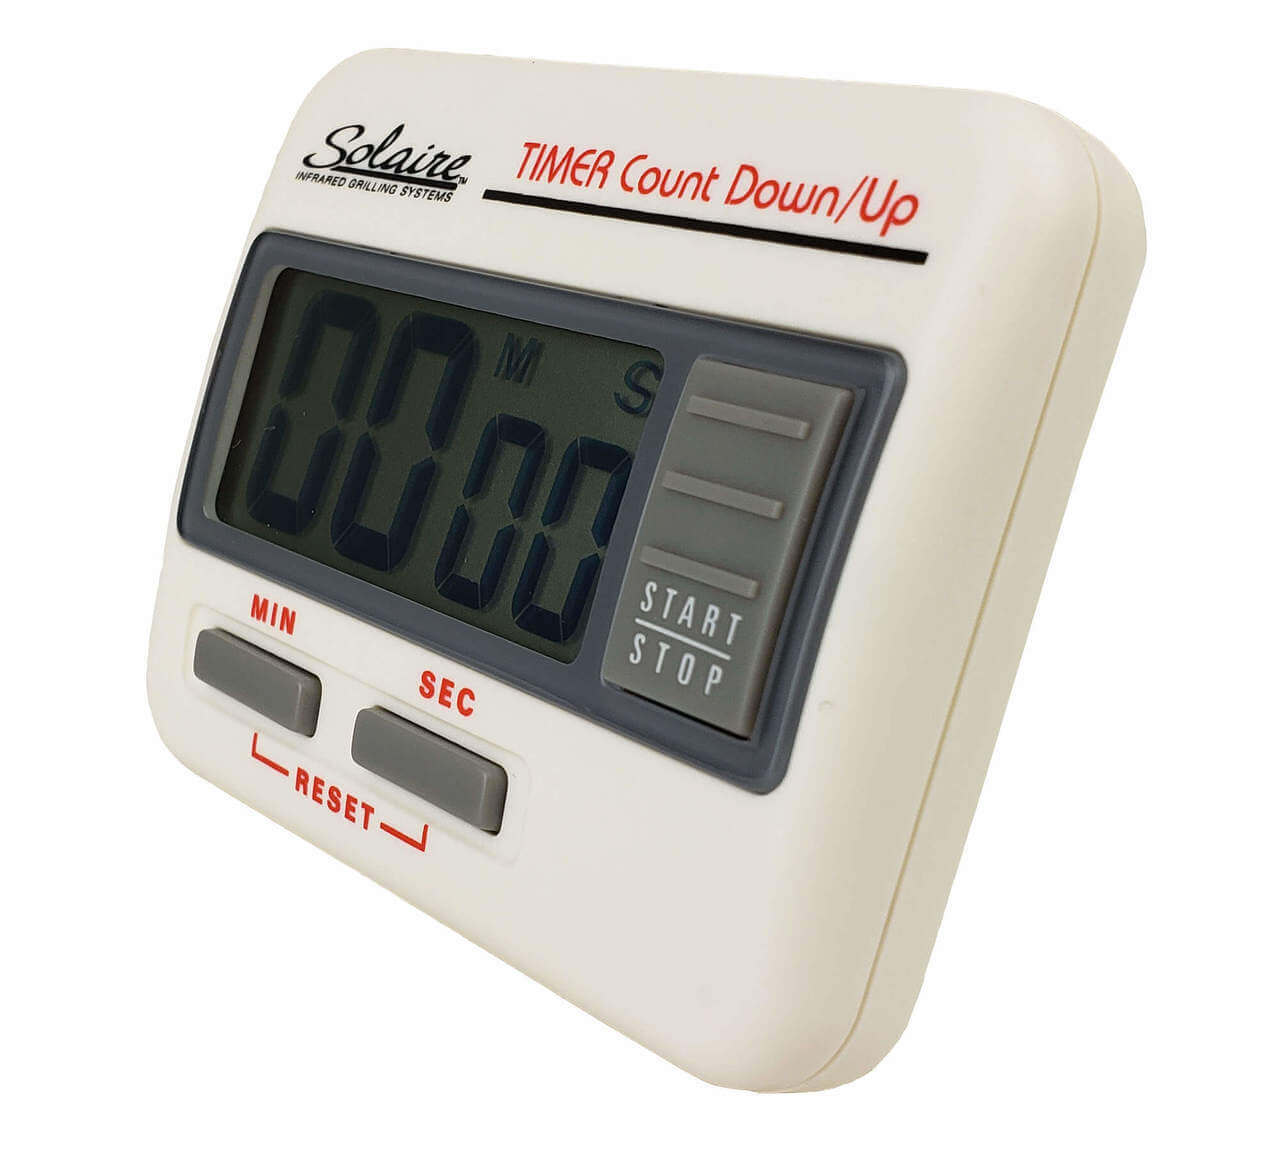 Solaire digital BBQ grill timer to keep track of your cooking minutes